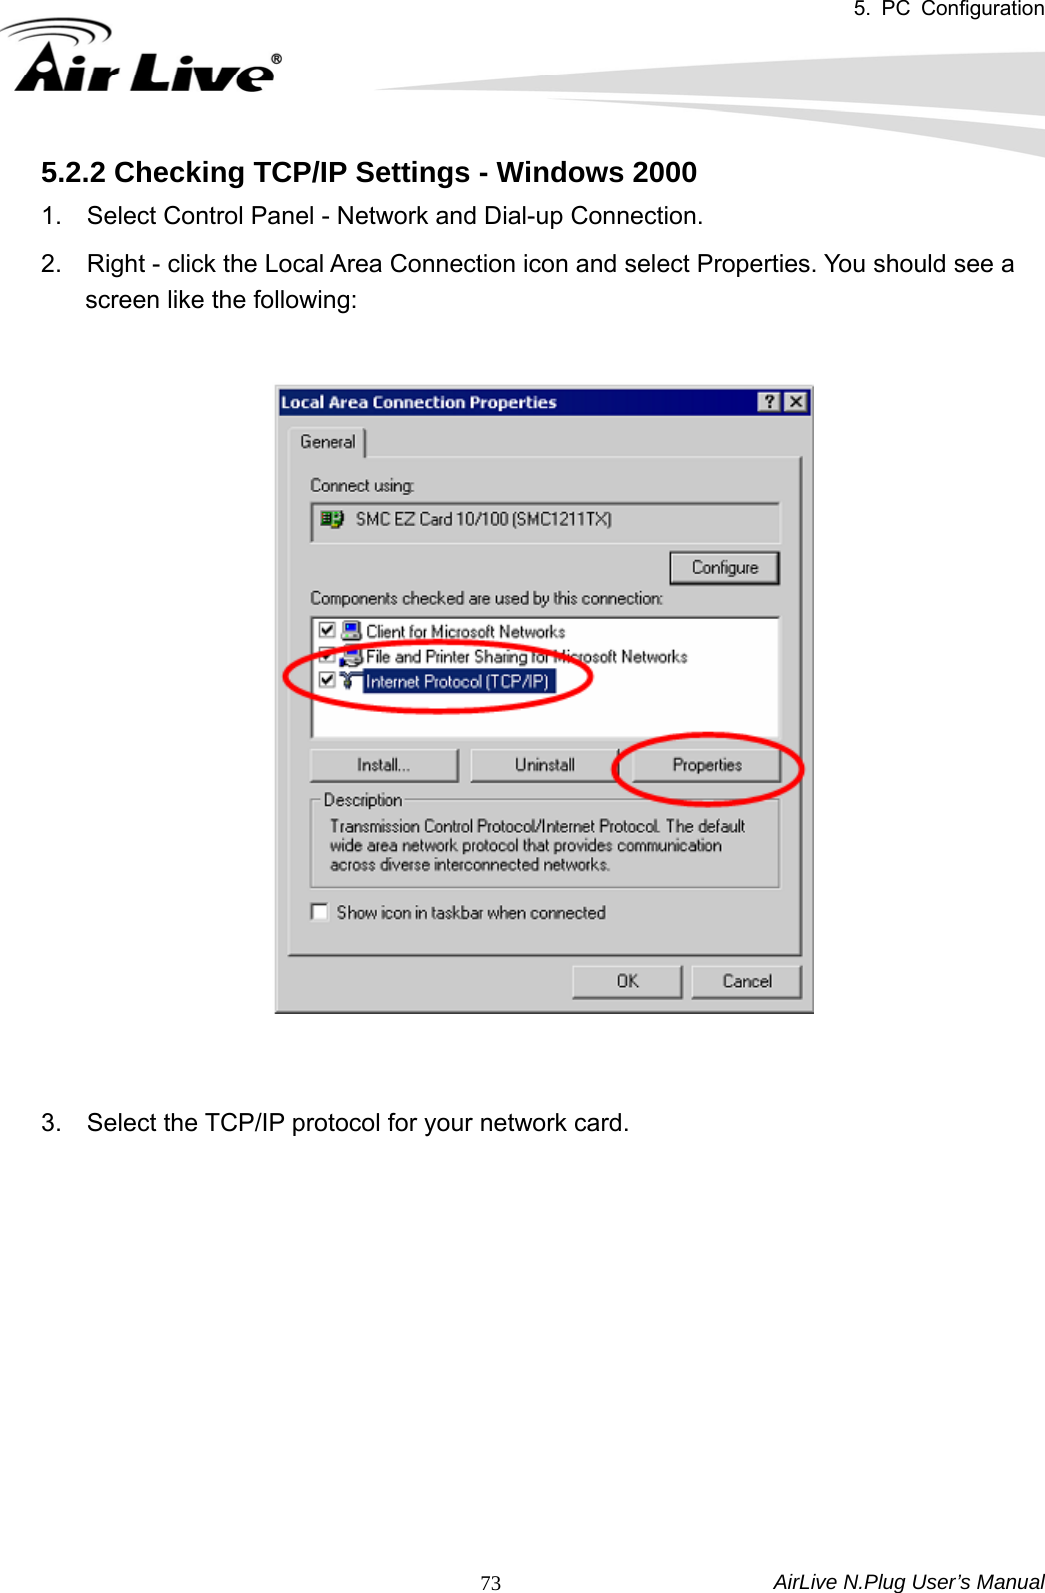 5. PC Configuration  AirLive N.Plug User’s Manual  735.2.2 Checking TCP/IP Settings - Windows 2000 1.    Select Control Panel - Network and Dial-up Connection.   2.    Right - click the Local Area Connection icon and select Properties. You should see a screen like the following:       3.    Select the TCP/IP protocol for your network card.             